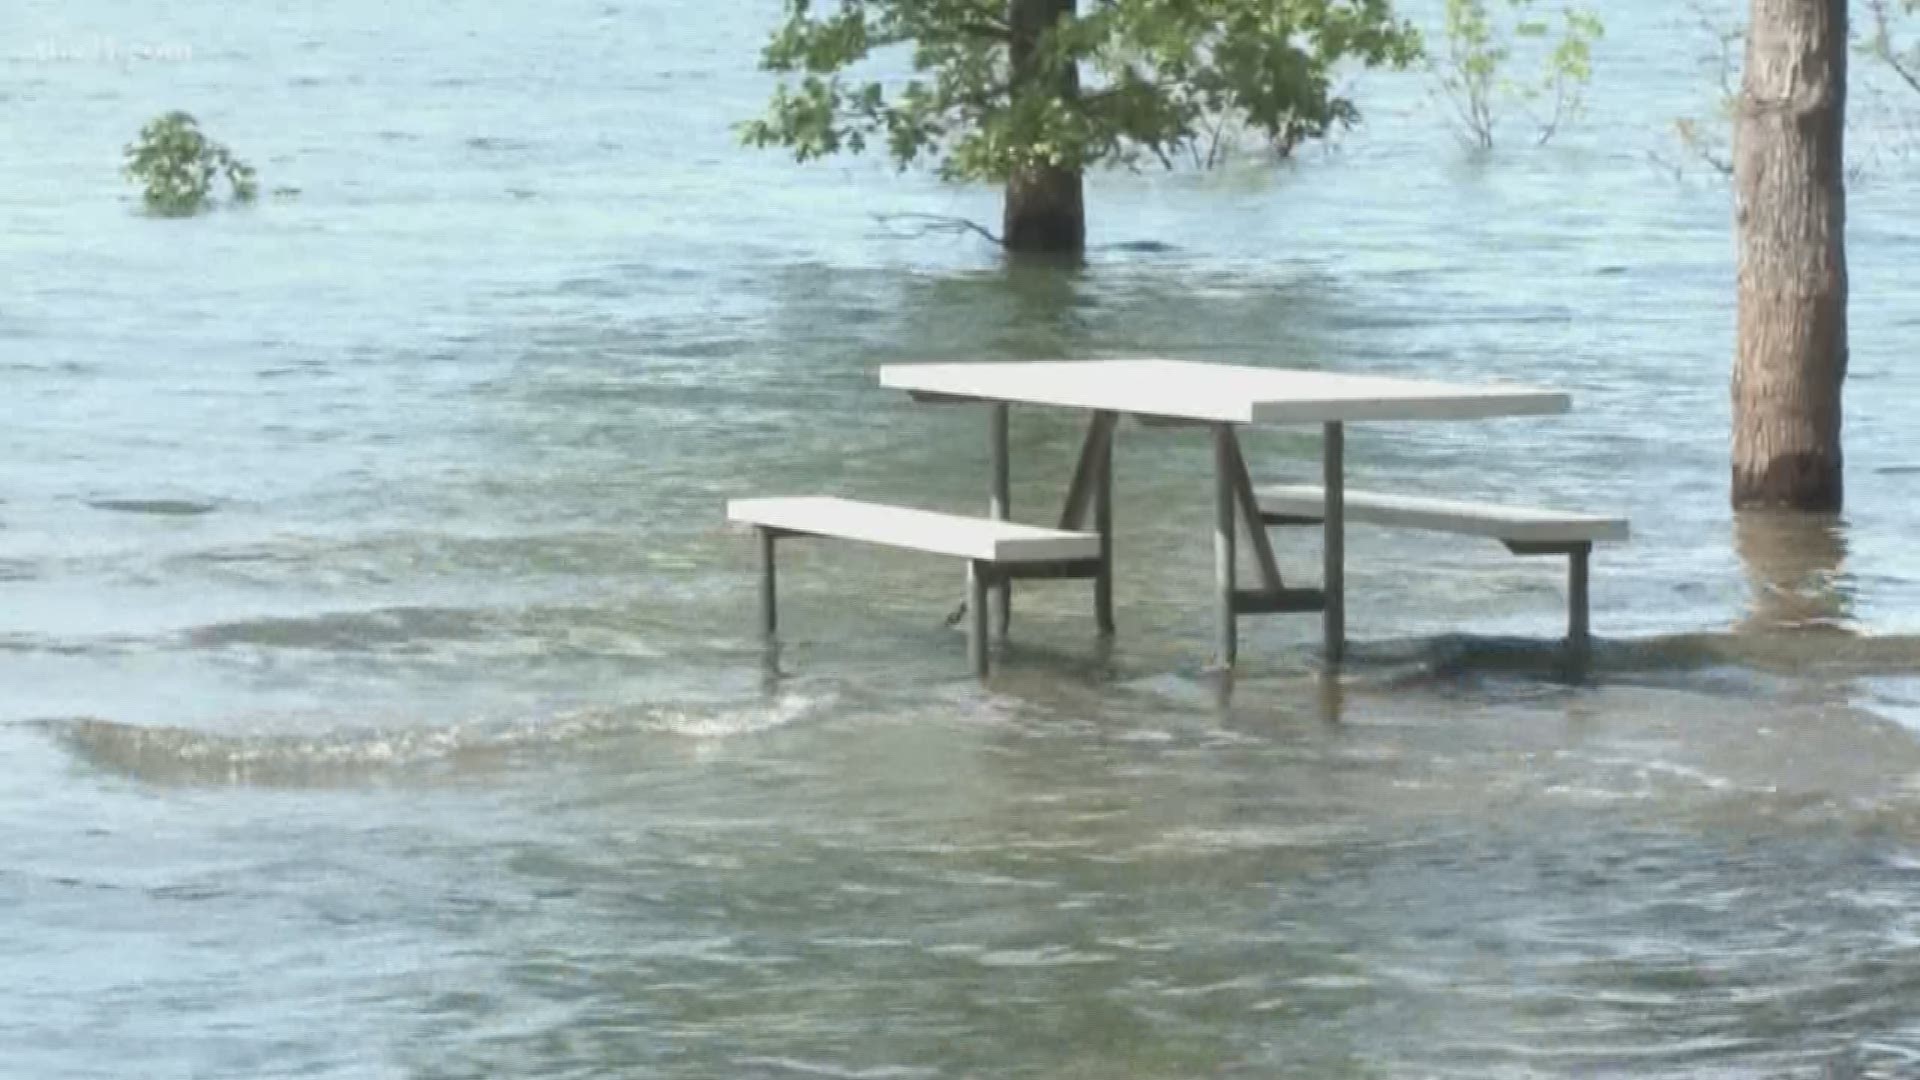 "We have about 1,130 campsites lake-wide and right now we have 180 campsites affected by the high water," a Greers Ferry Lake Park Ranger said.